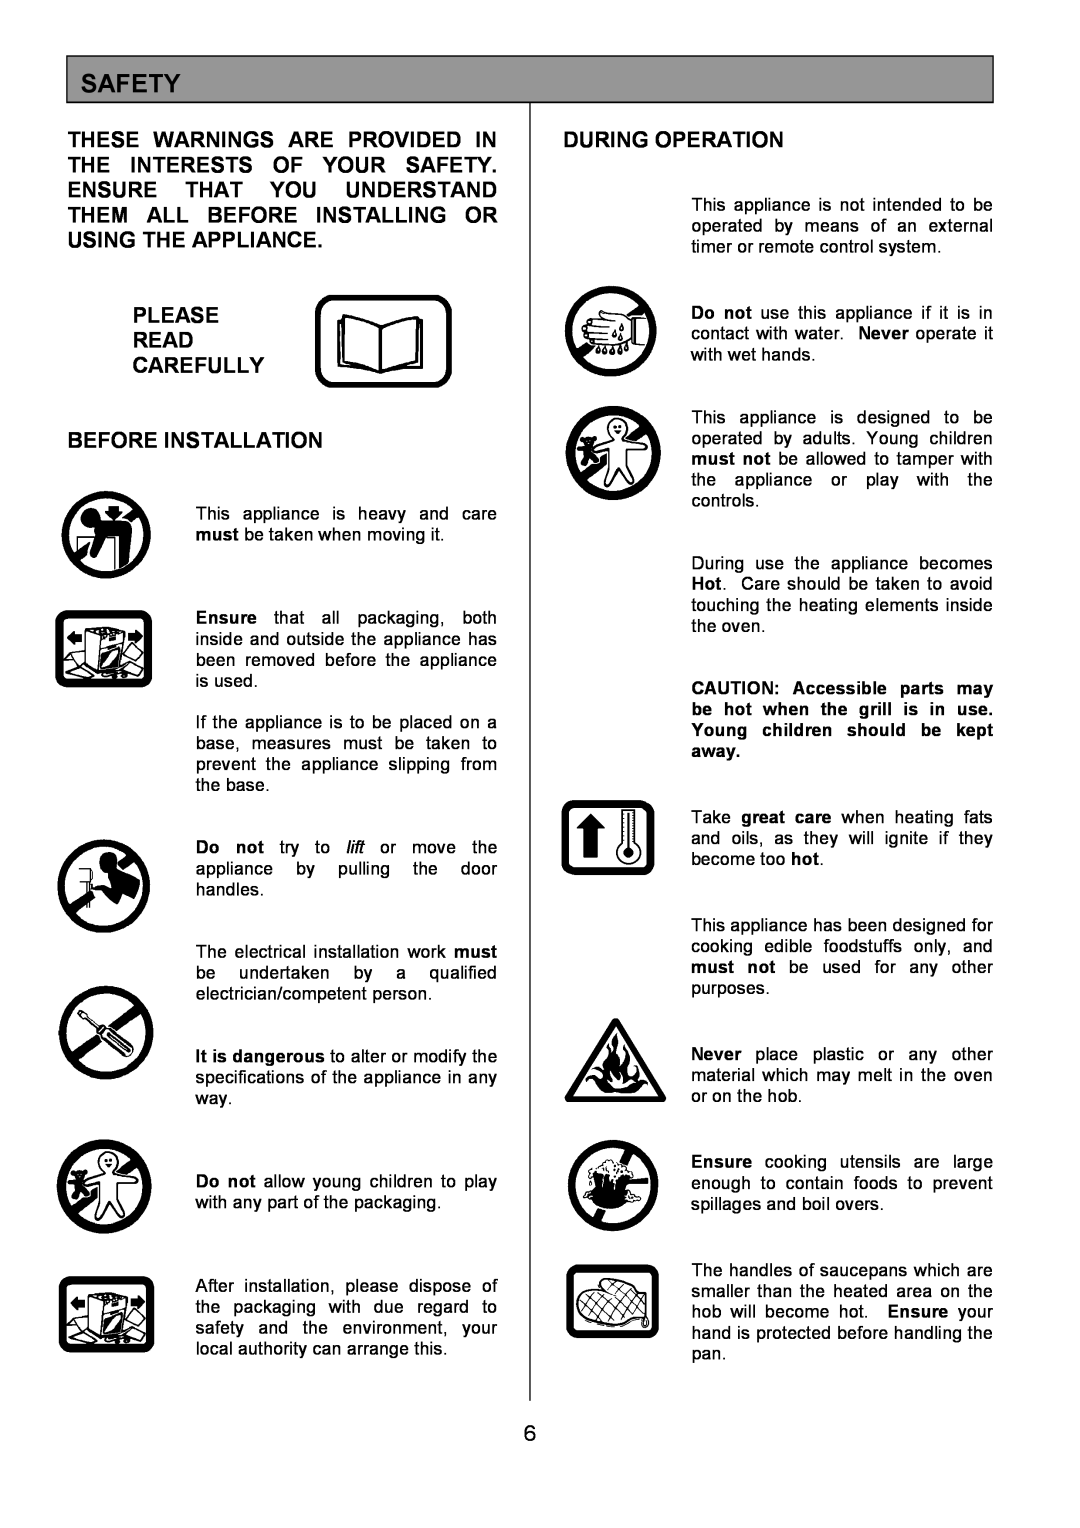 Tricity Bendix SE402 installation instructions Safety, Please Read Carefully Before Installation, During Operation 